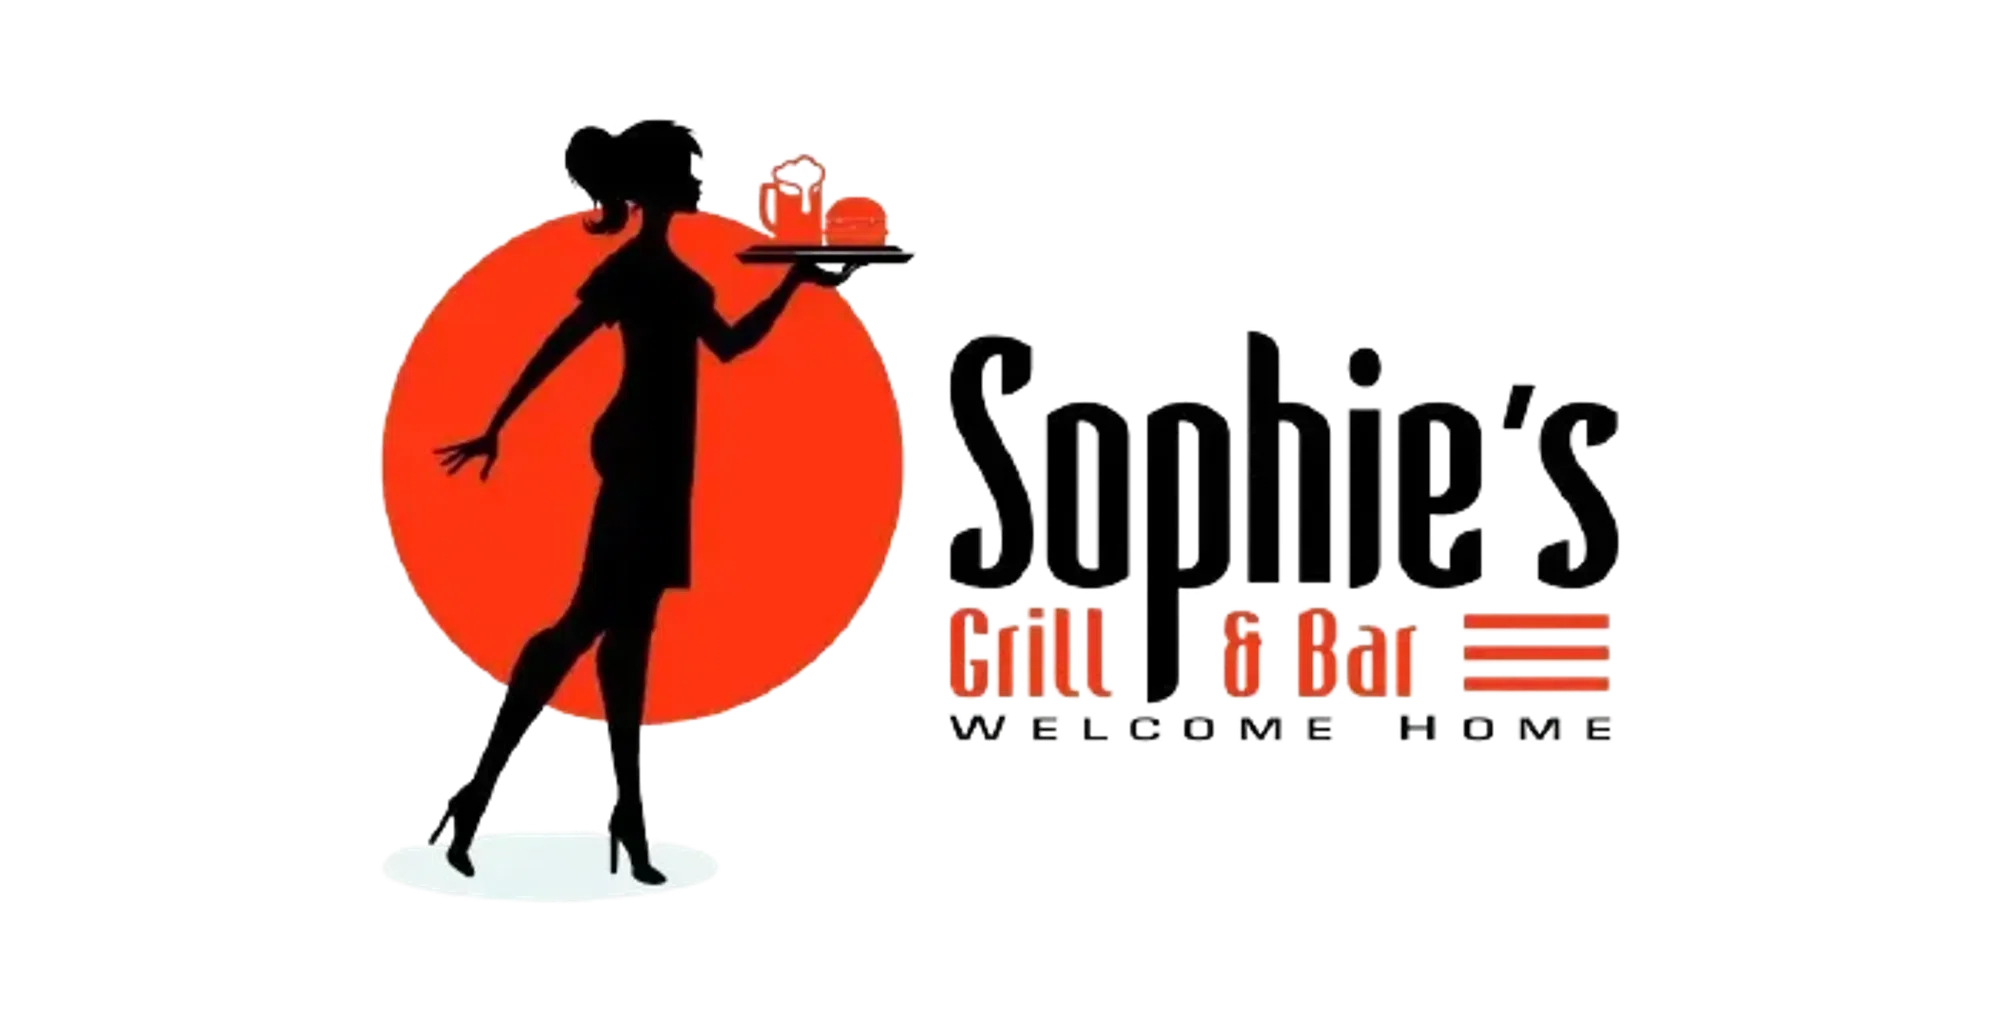 Sophie’s Grill & Bar